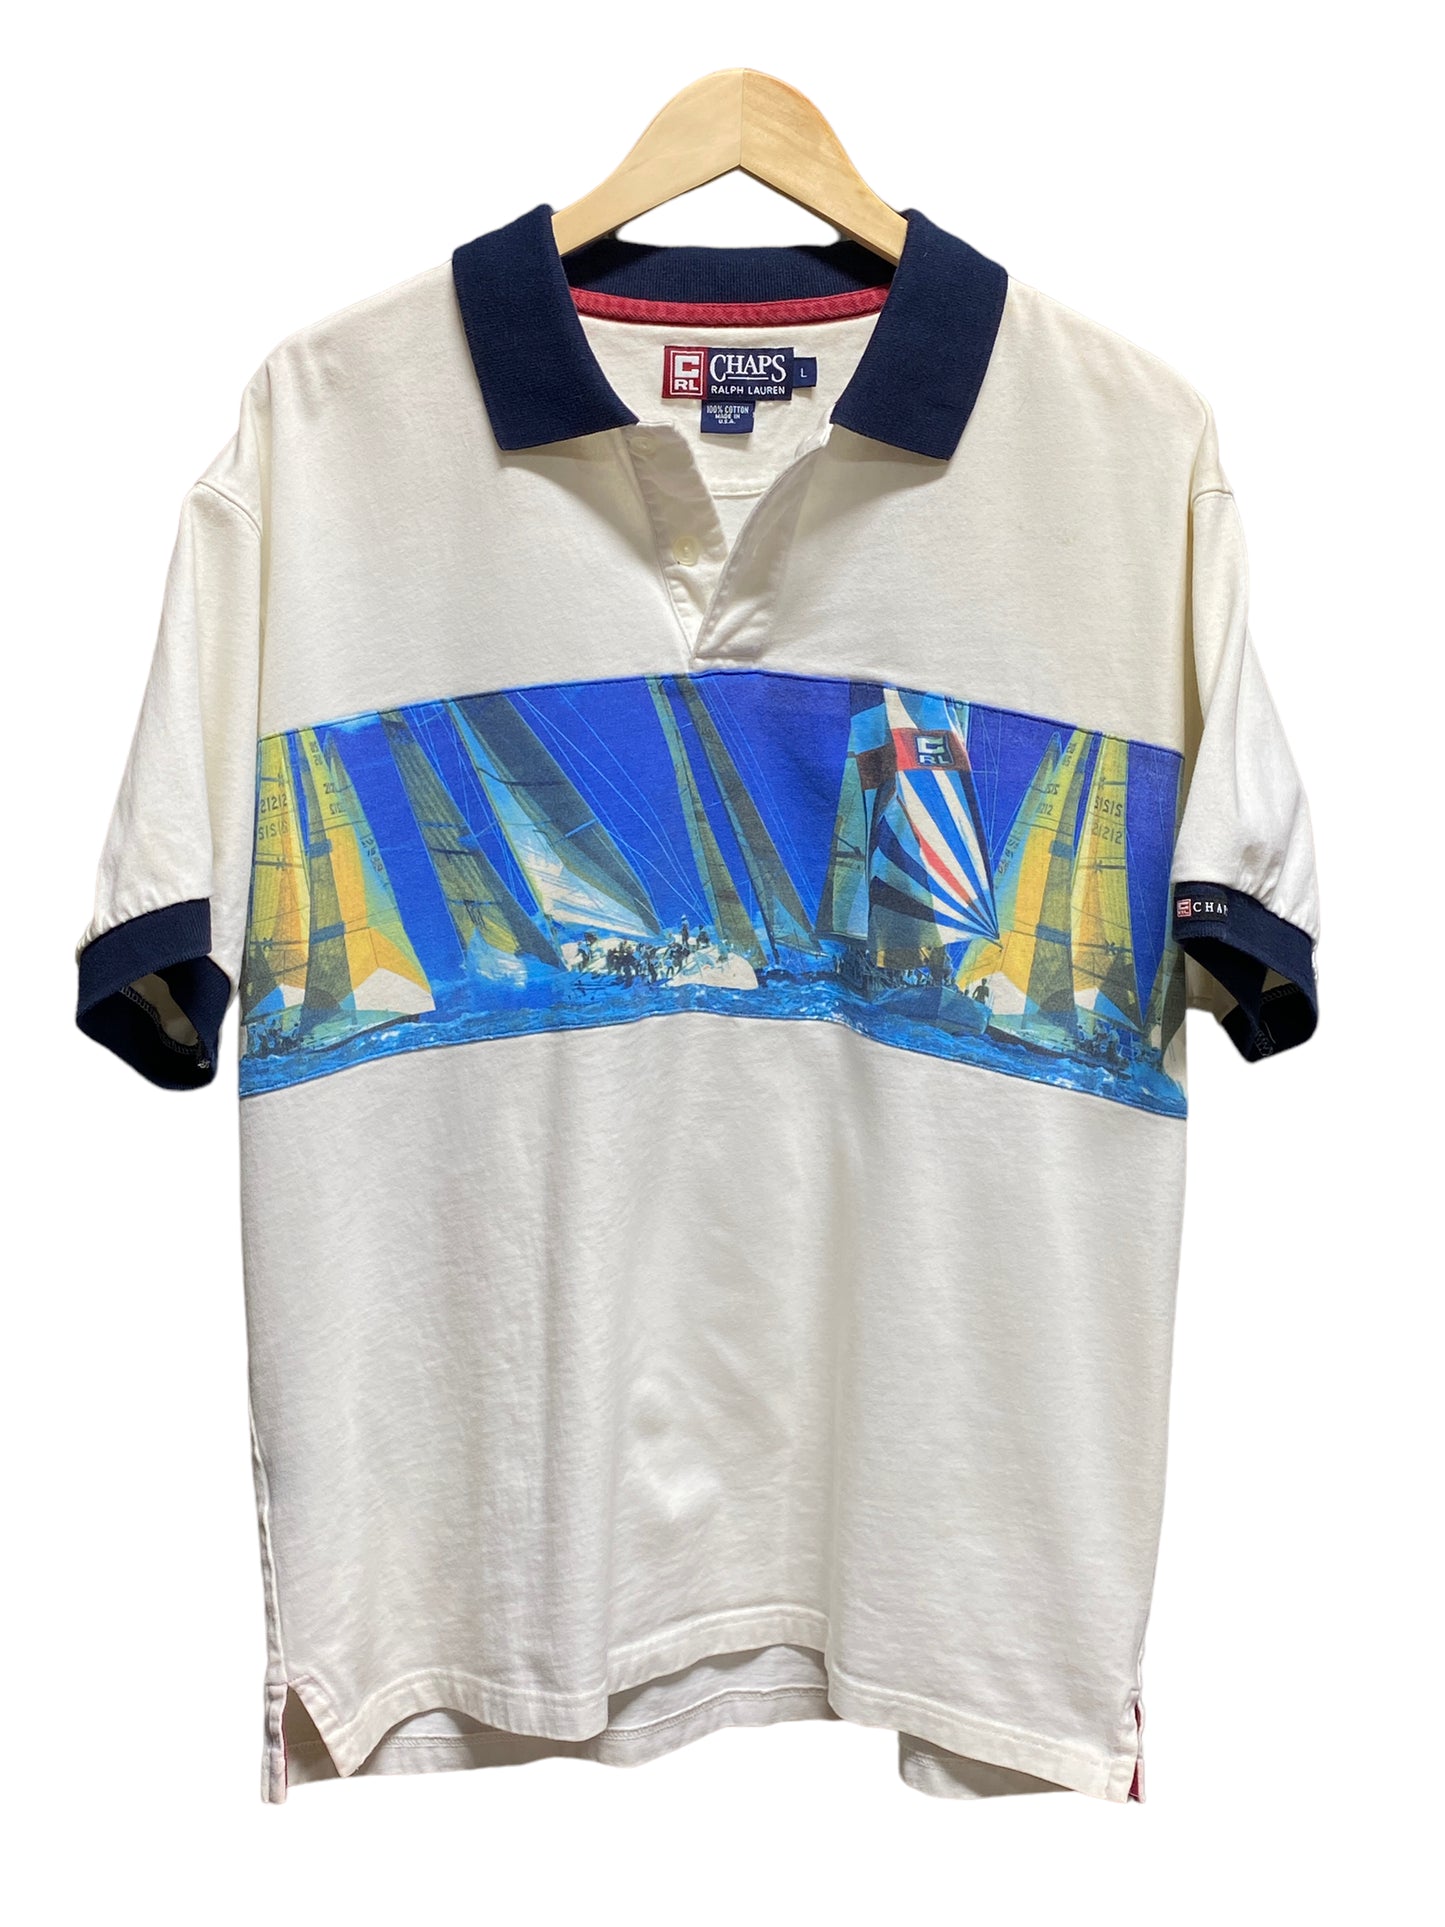 Vintage 90's Chaps Ralph Lauren Sailing Graphic Polo Made in USA Size Large